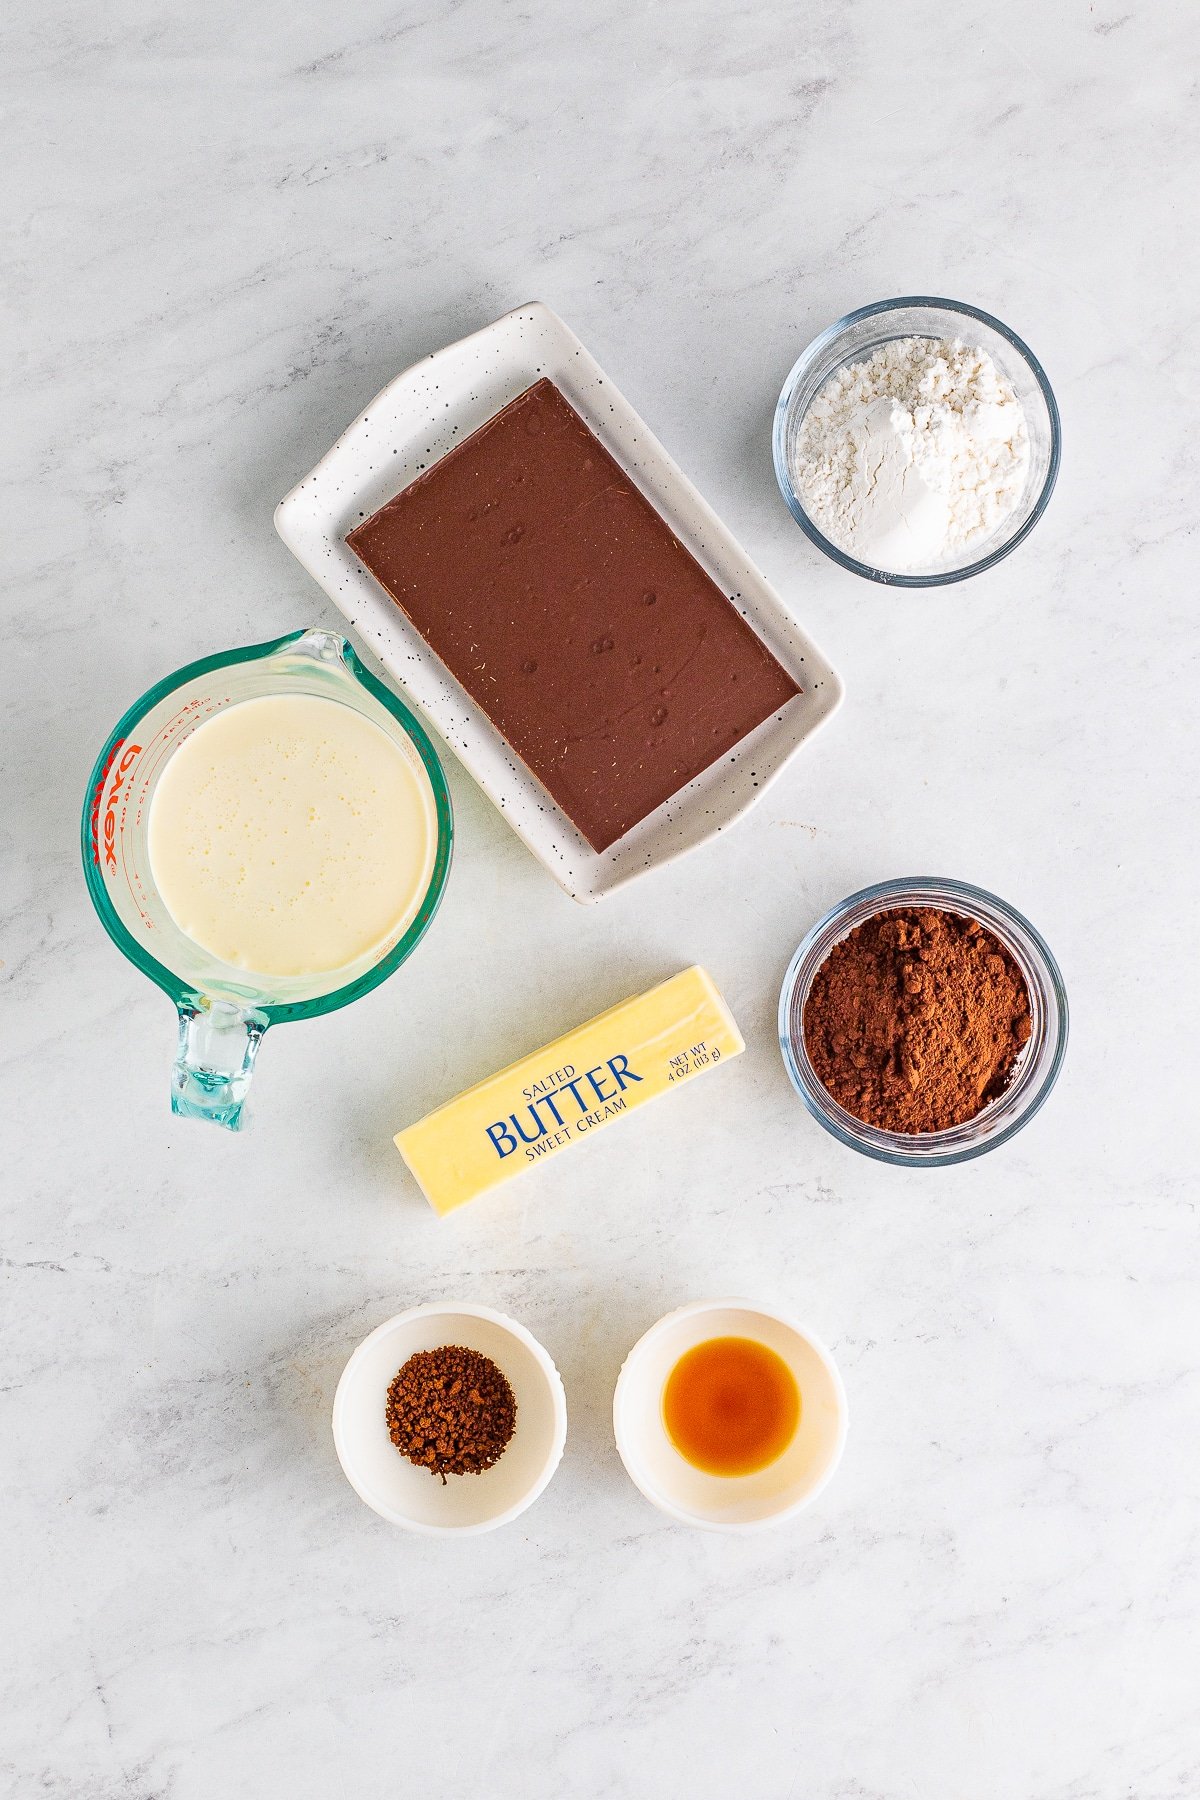 ingredients needed for easy chocolate mousse